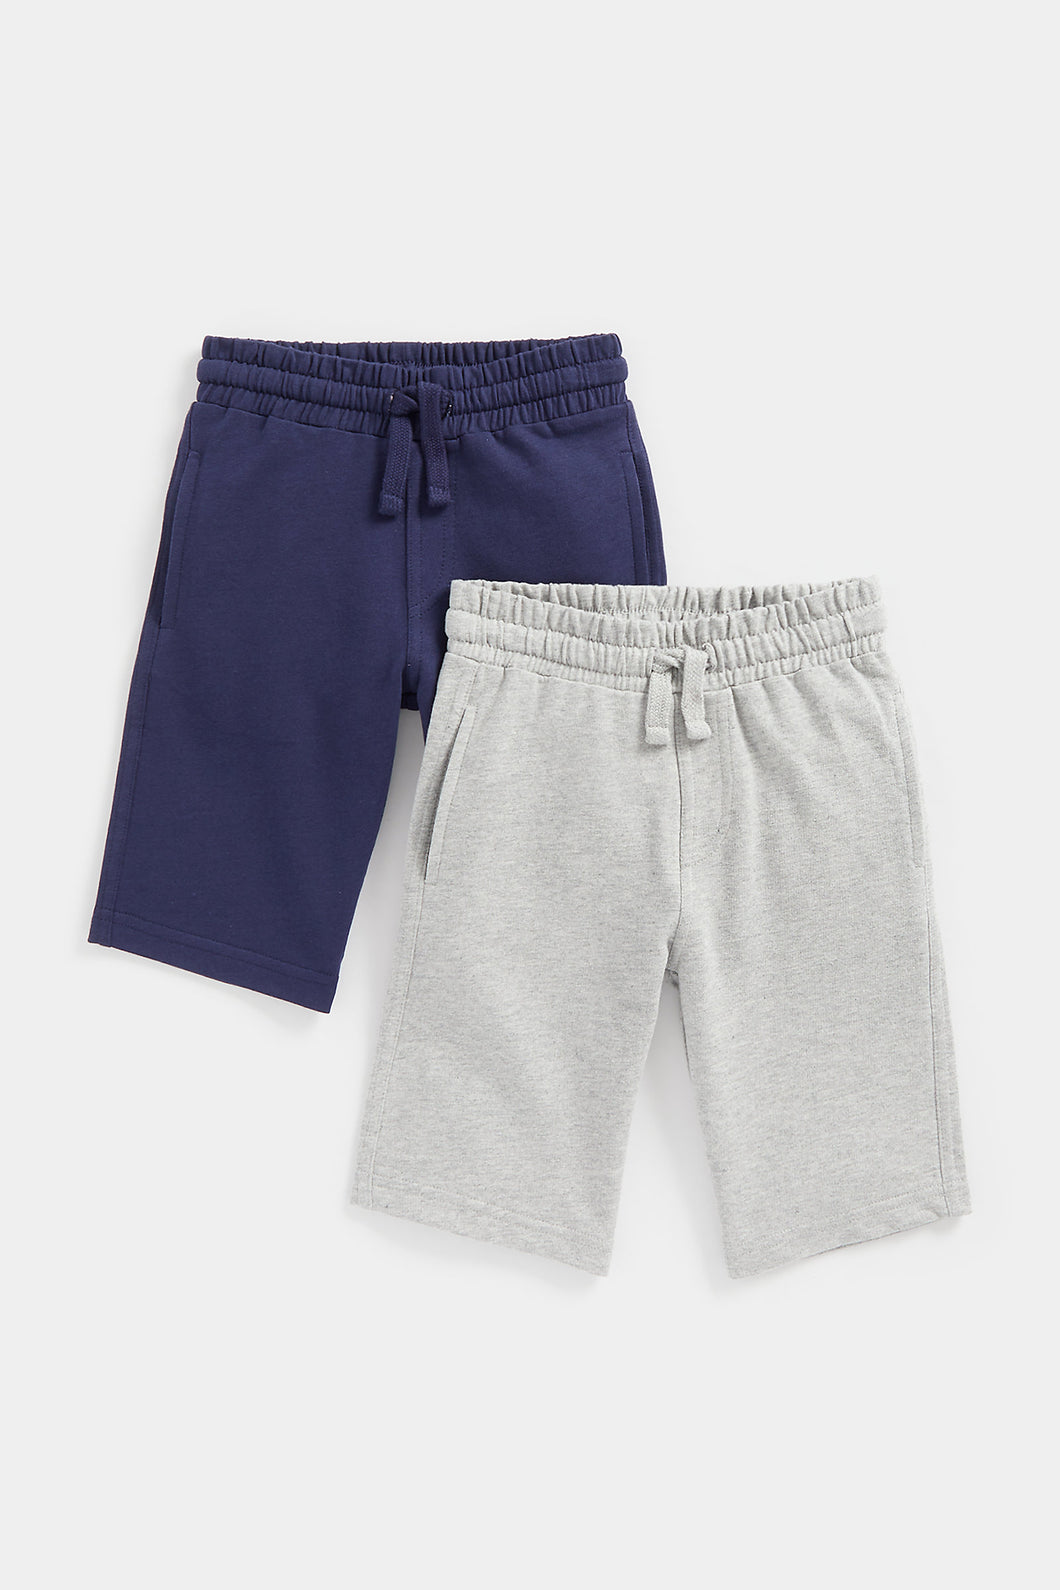 Mothercare Grey And Navy Shorts - 2 Pack